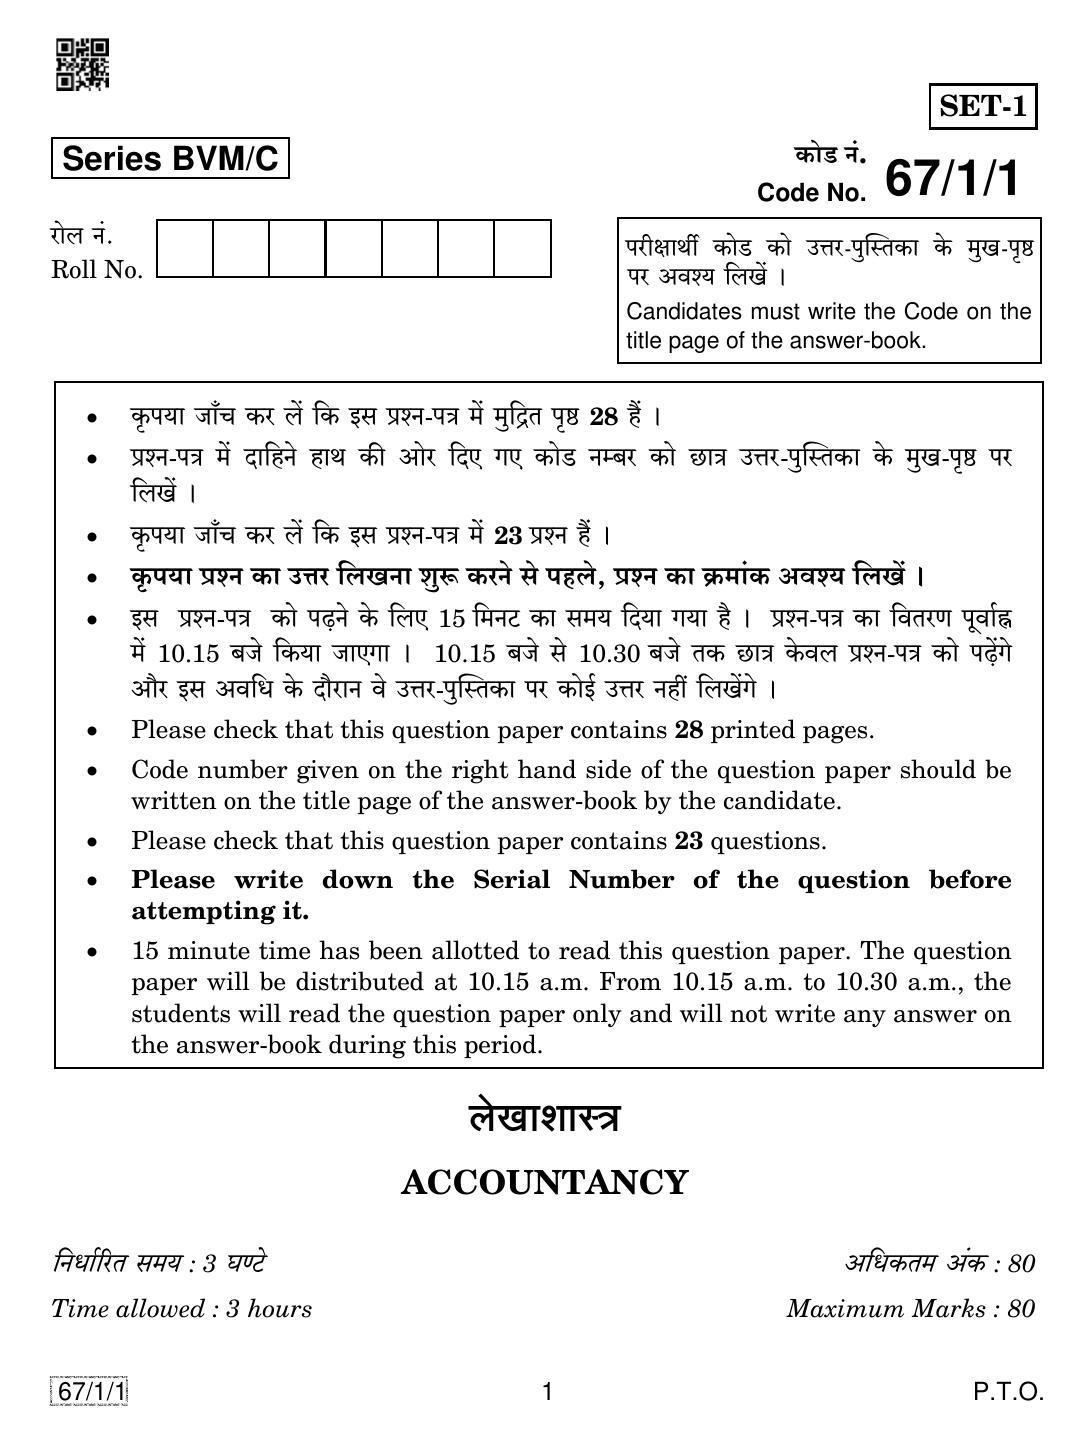 CBSE Class 12 67-1-1 ACCOUNTANCY 2019 Compartment Question Paper - Page 1